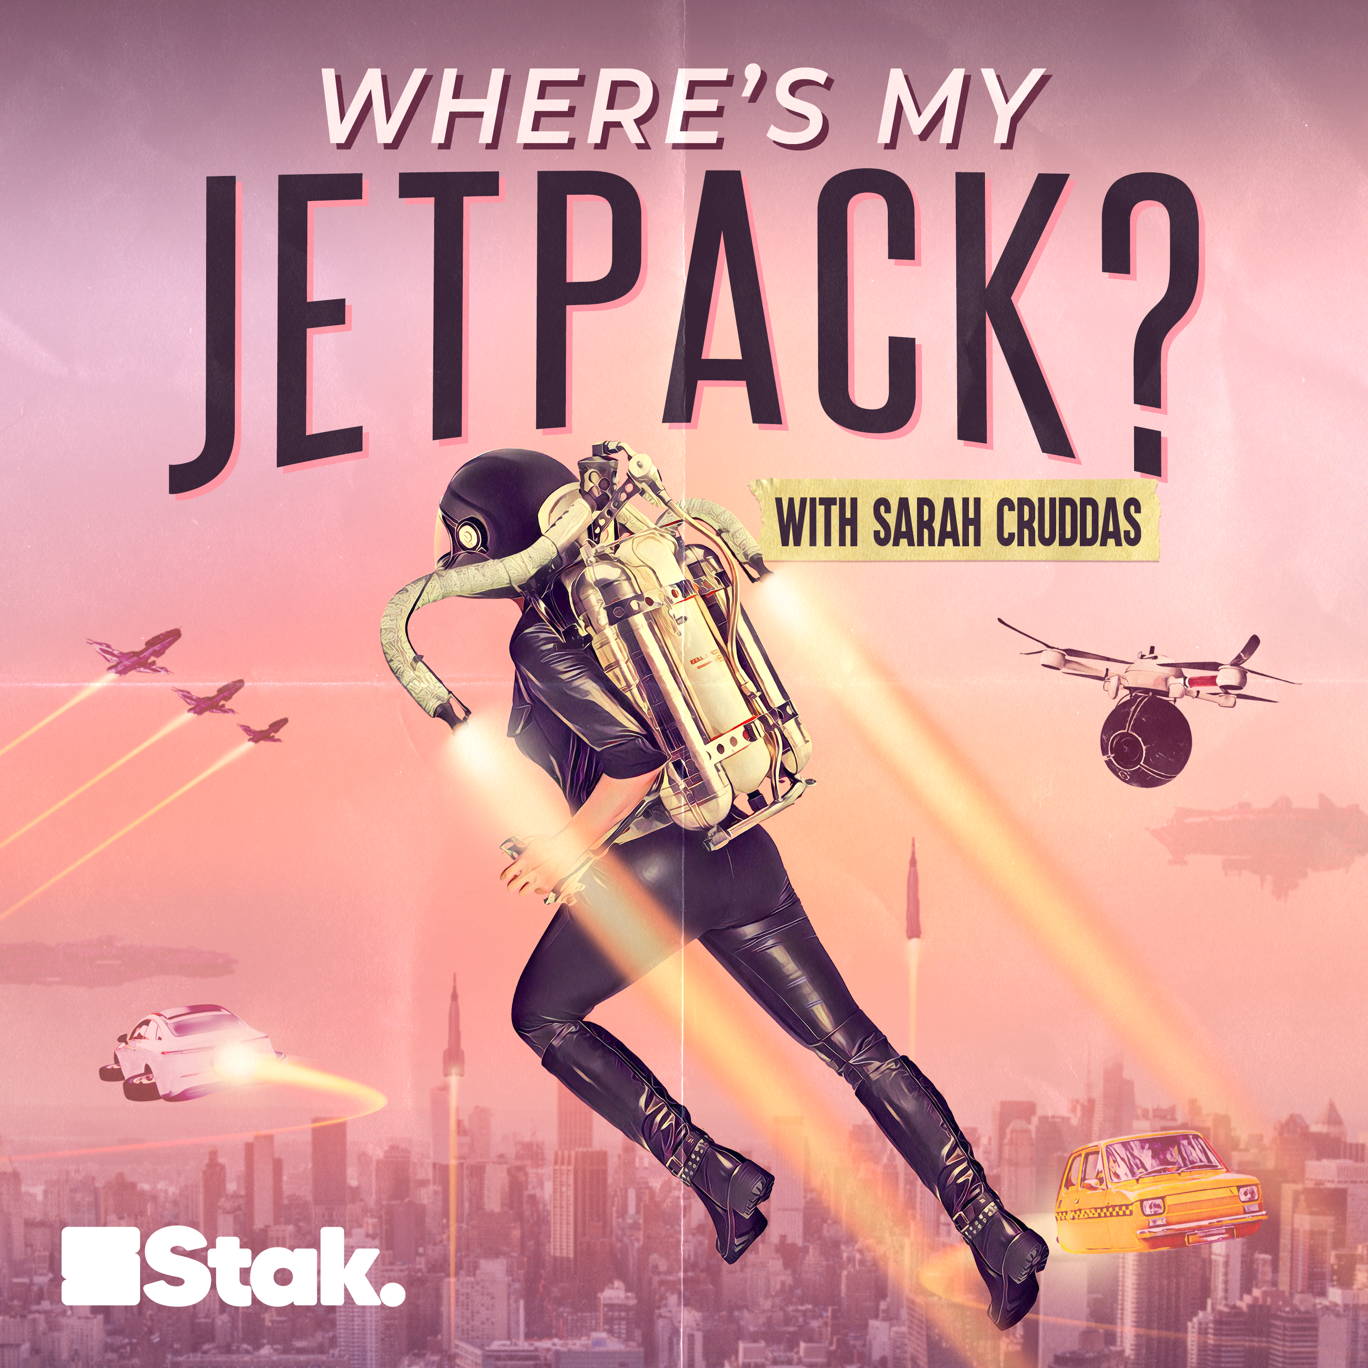 The artwork for the Where's My Jetpack? podcast.